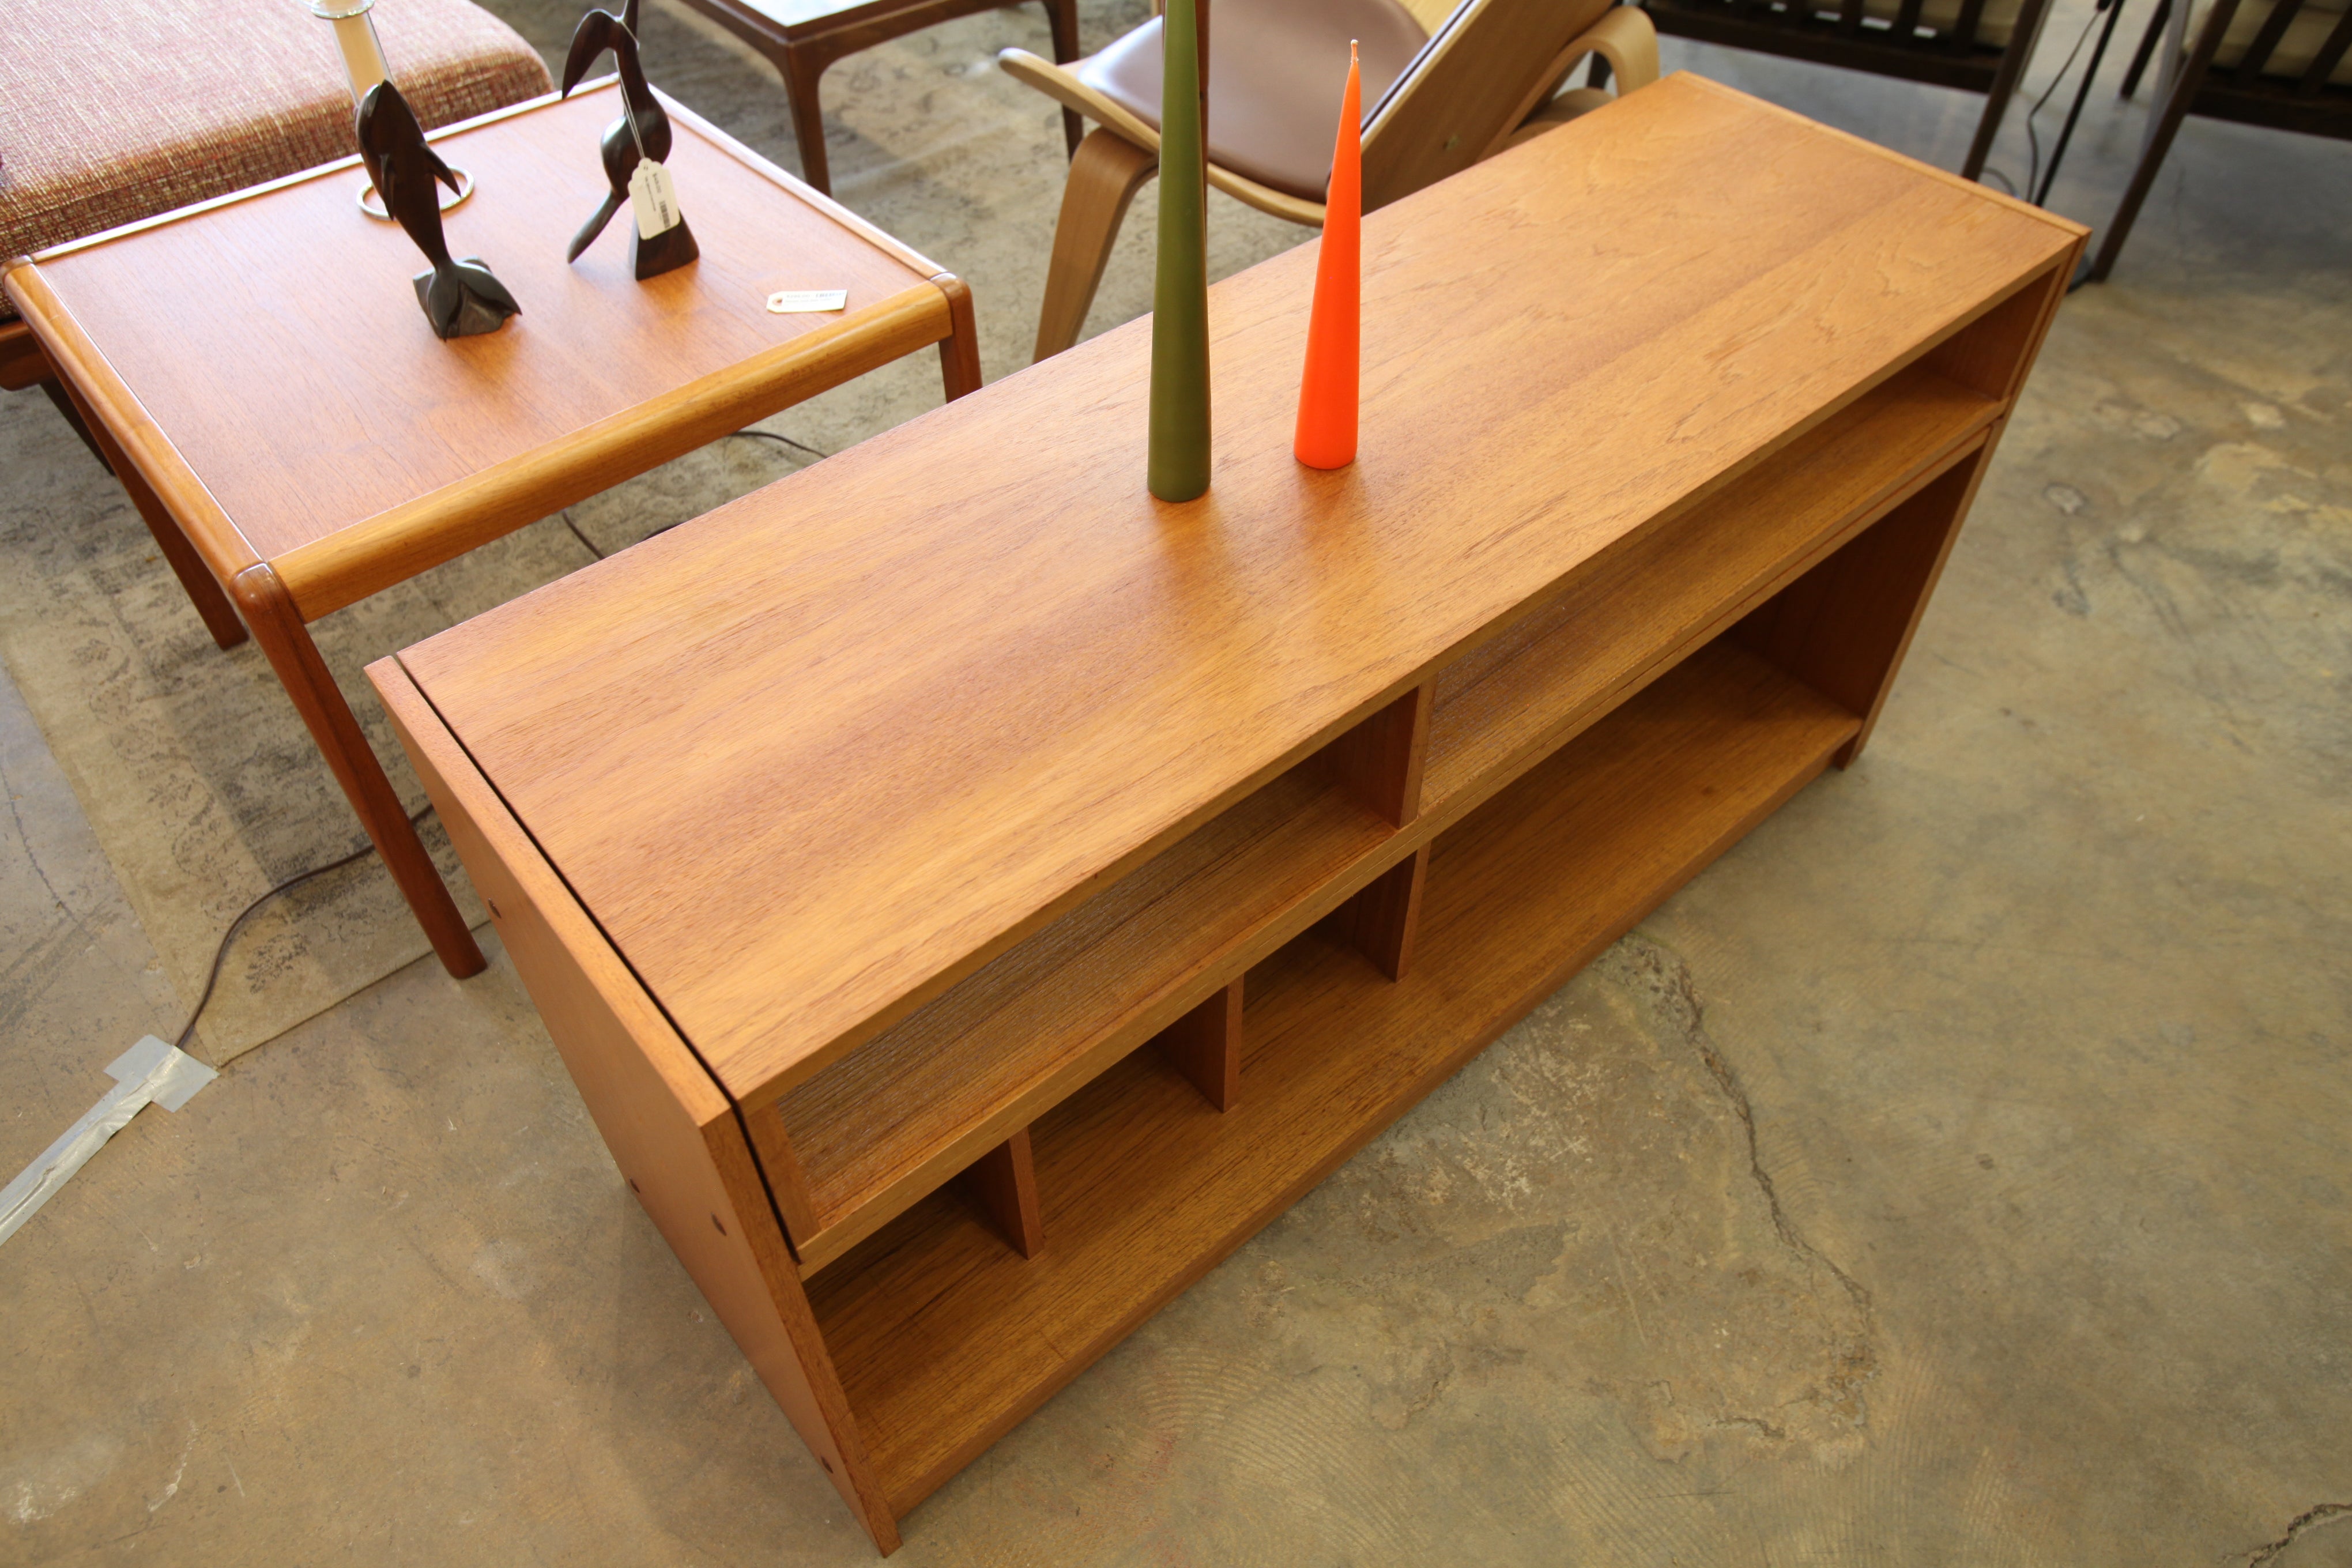 Vintage Teak Expandable Stereo / Media Stand (48.75-92"W x 23.25"H x 15.75"D)